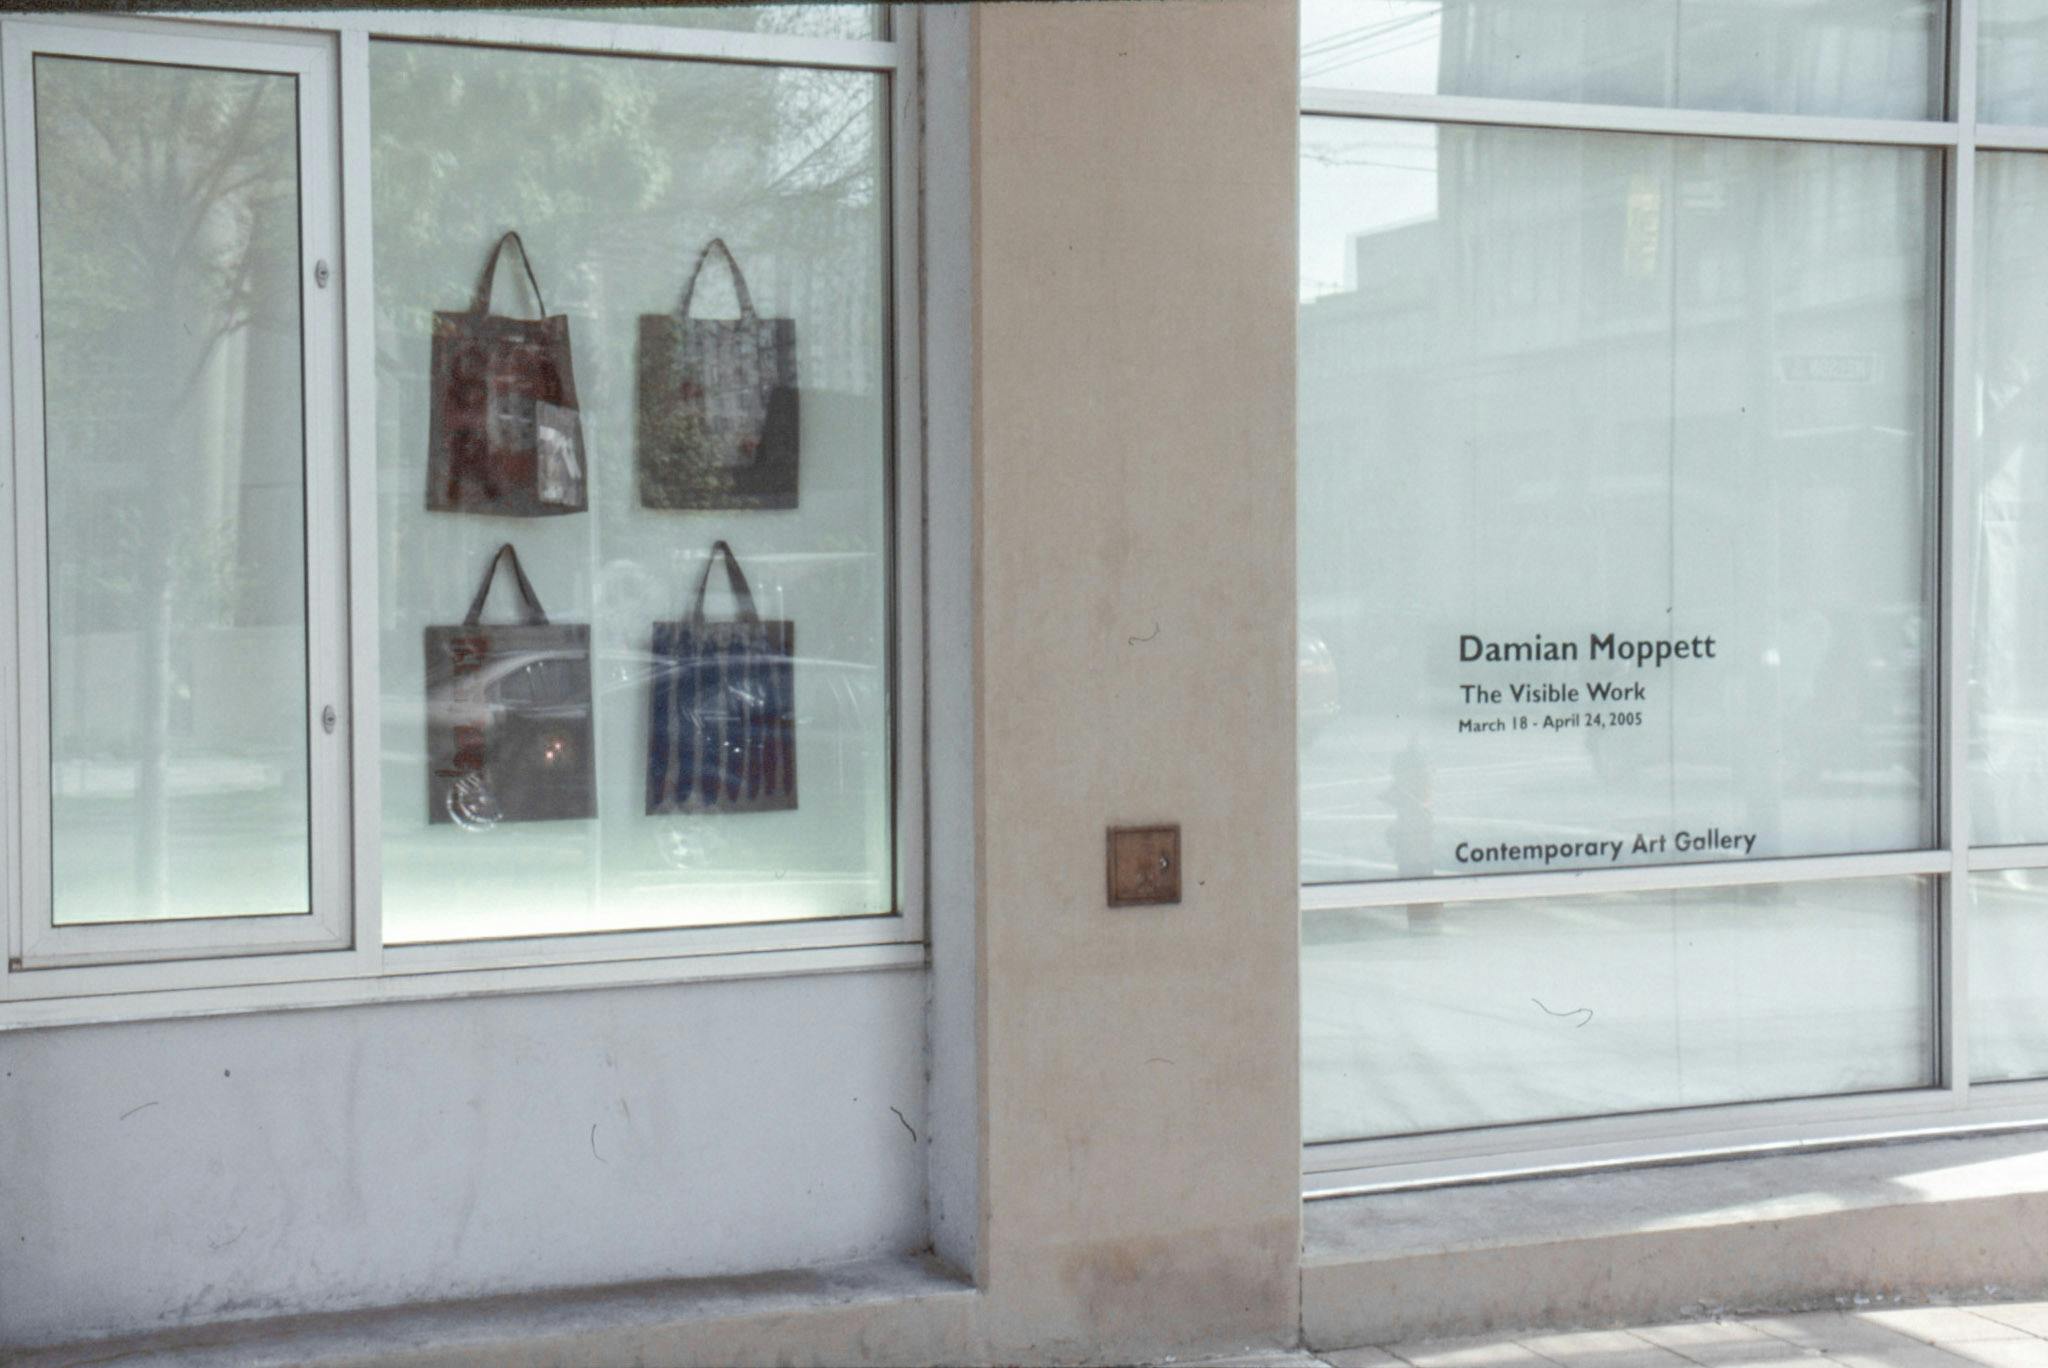 An install image of CAG’s window spaces facing Nelson Street. Four tote bags are mounted behind the glass. On the other window, the artist’s name and exhibition information are printed on vinyl.